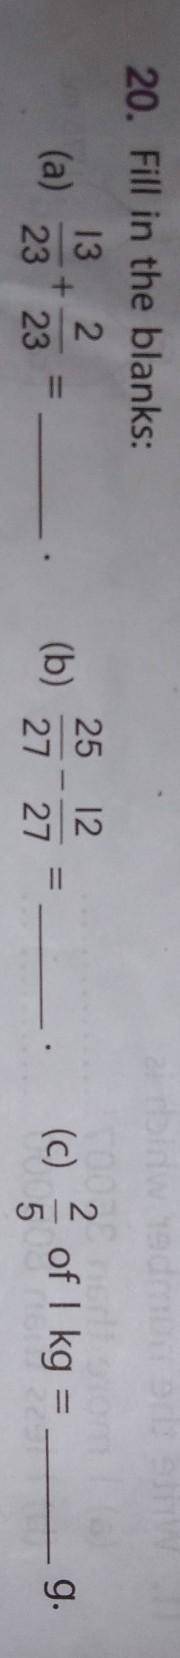 How To Solve these?